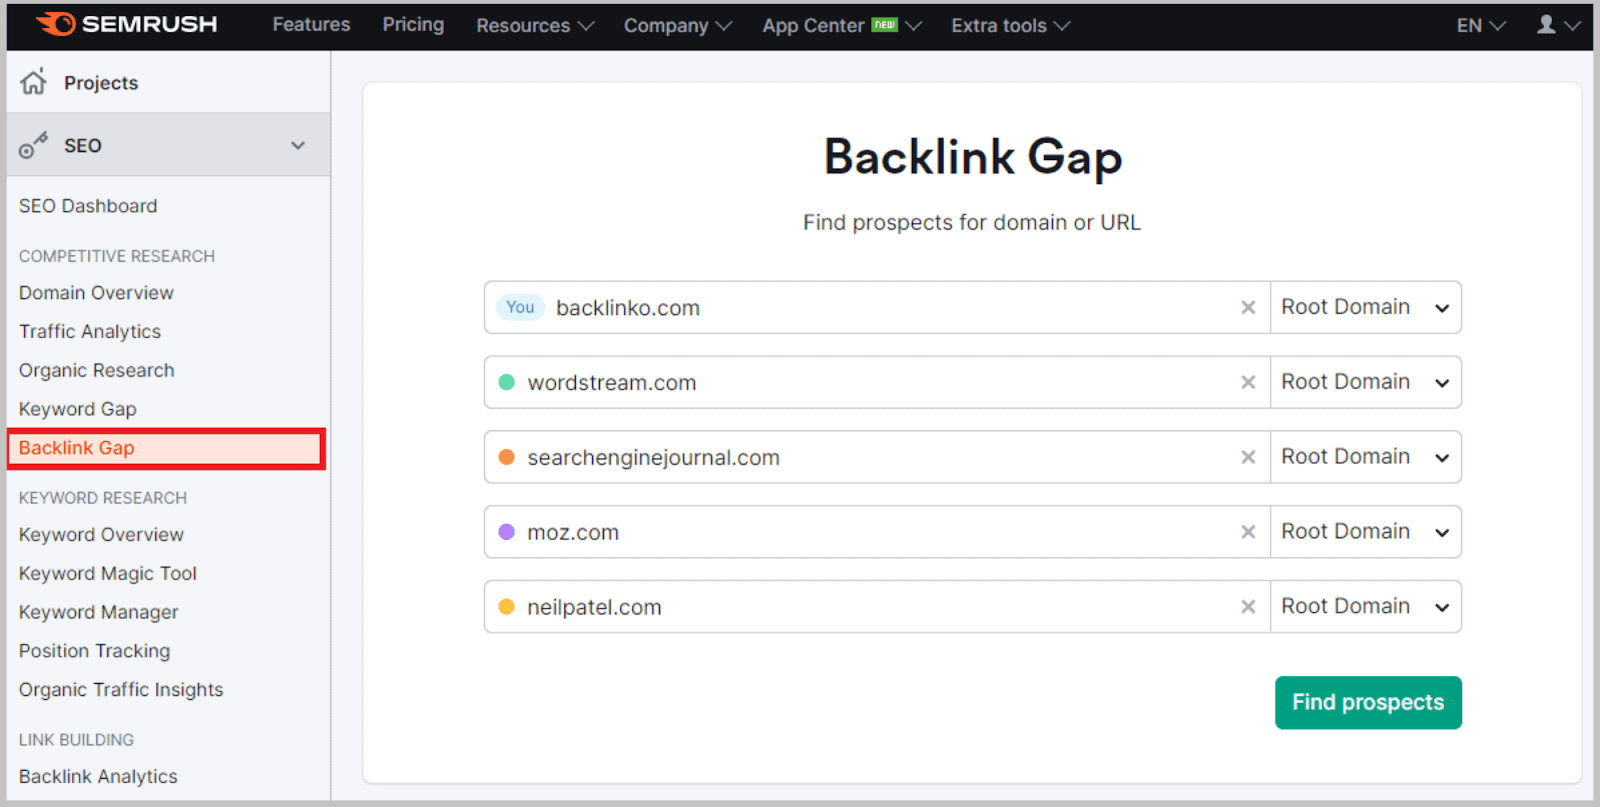 Conduct a backlink gap analysis of up to 4 competitors